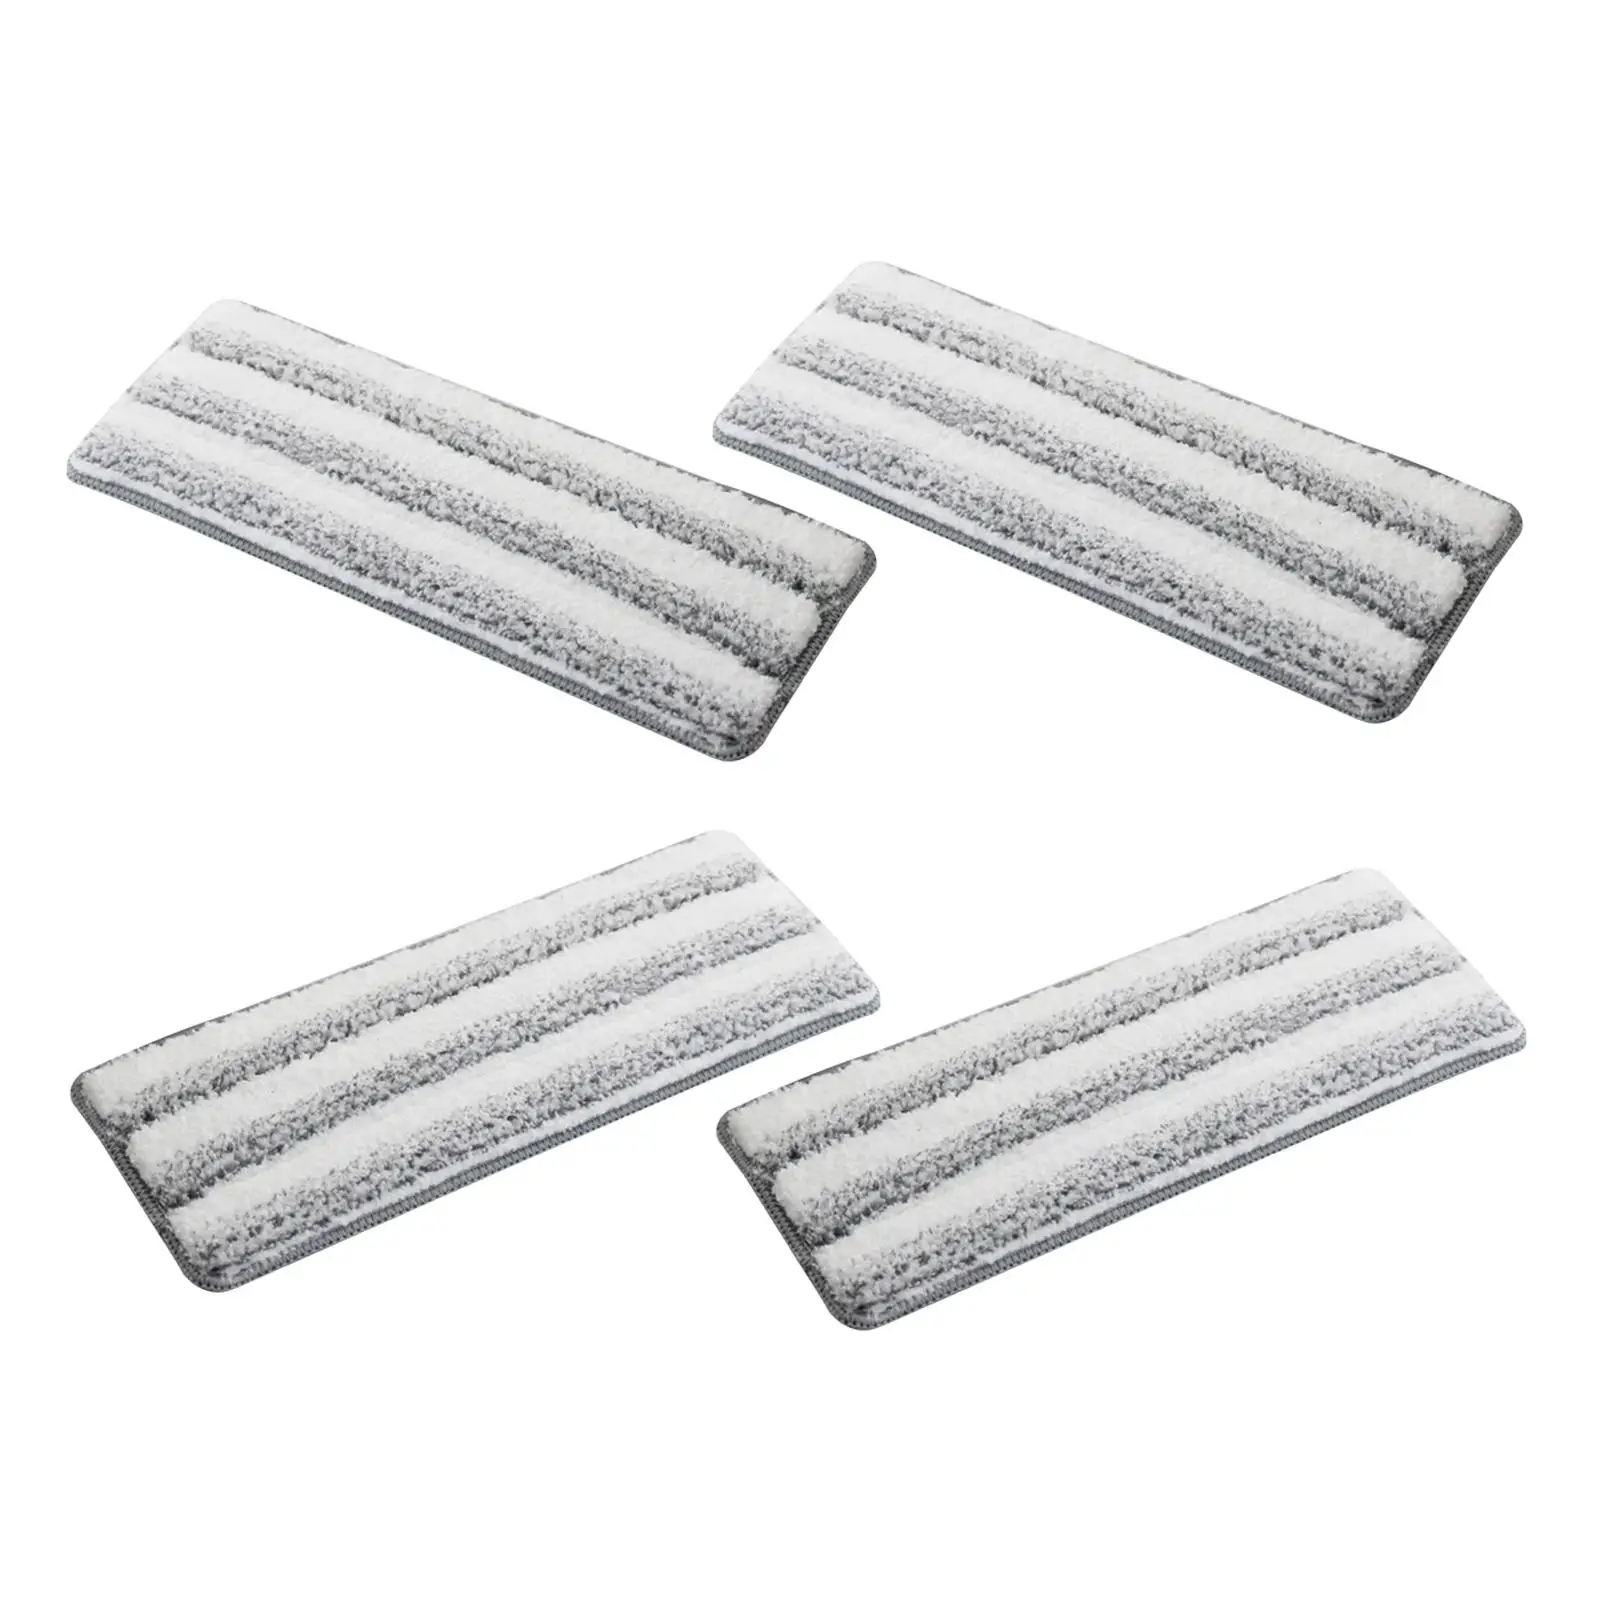 Replacement Mops Heads Refill Mops Refill for Dust Mops Pads Head for Bathroom